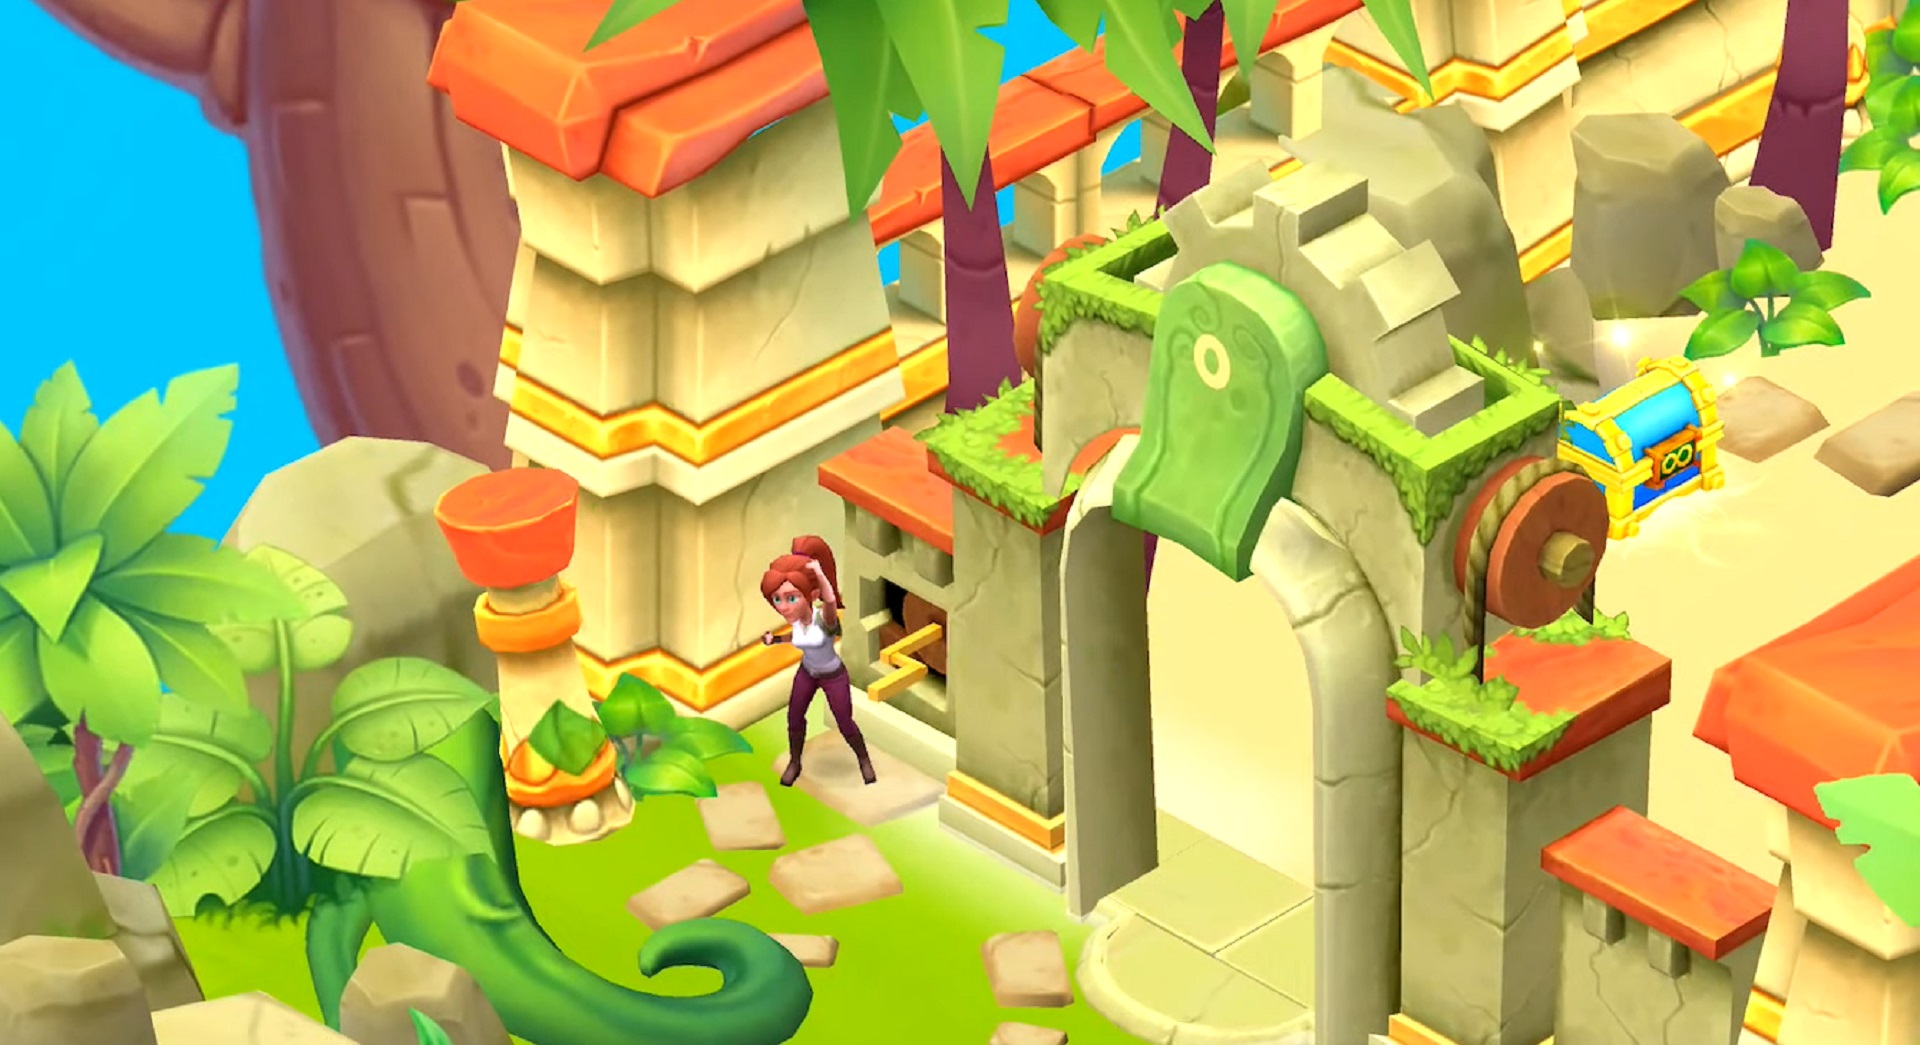 Temple Run returns with a new match-3 game exclusive to Apple Arcade